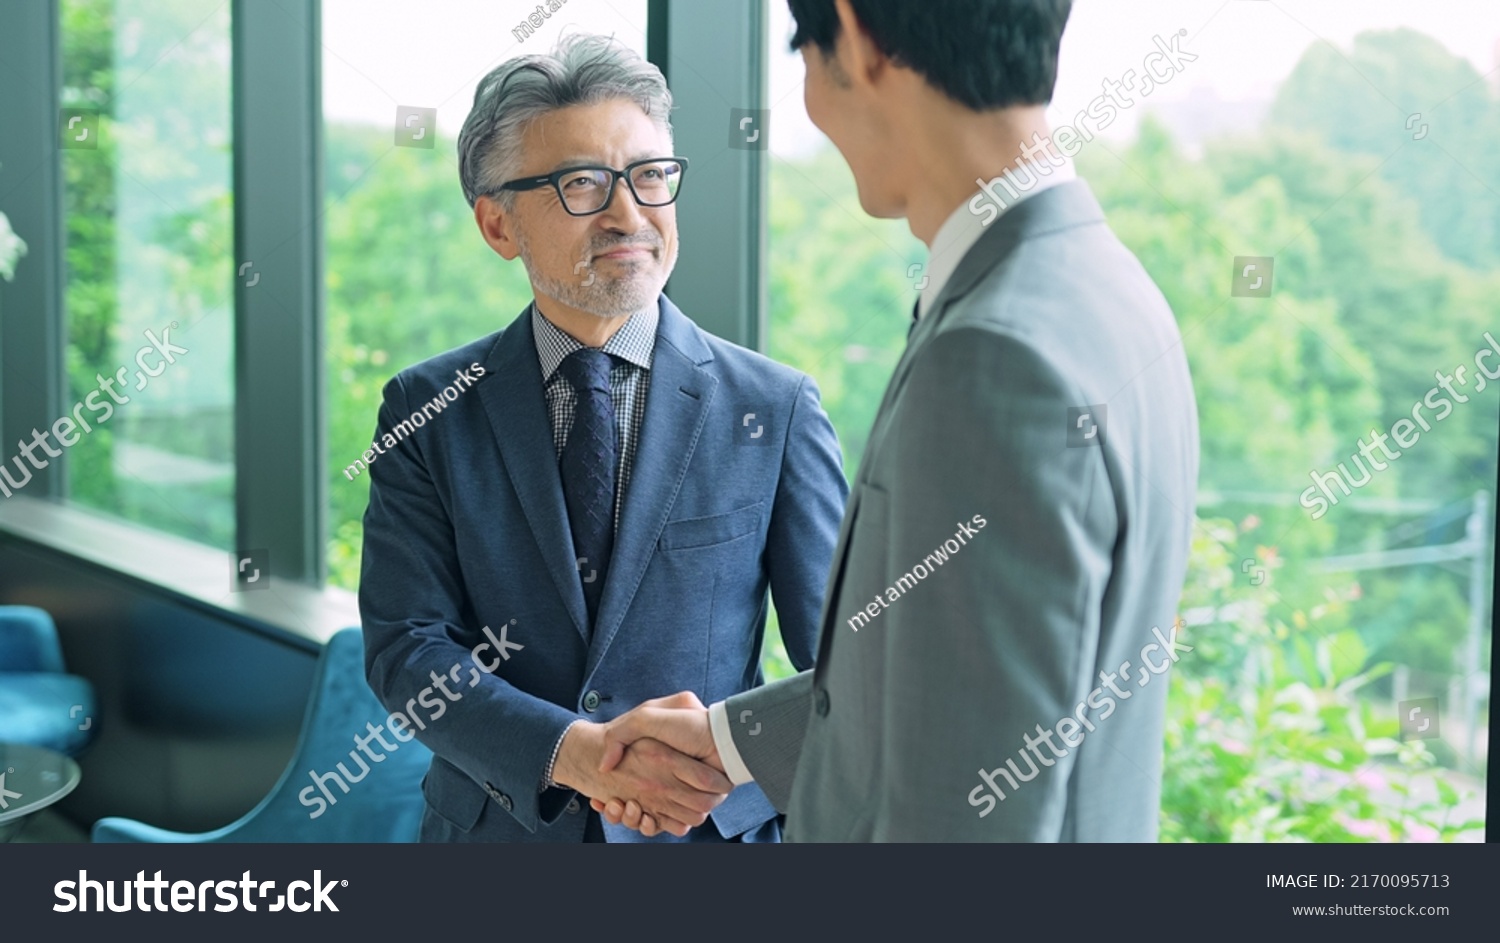 Middle aged executive man and young businessperson shaking hands in the office. #2170095713